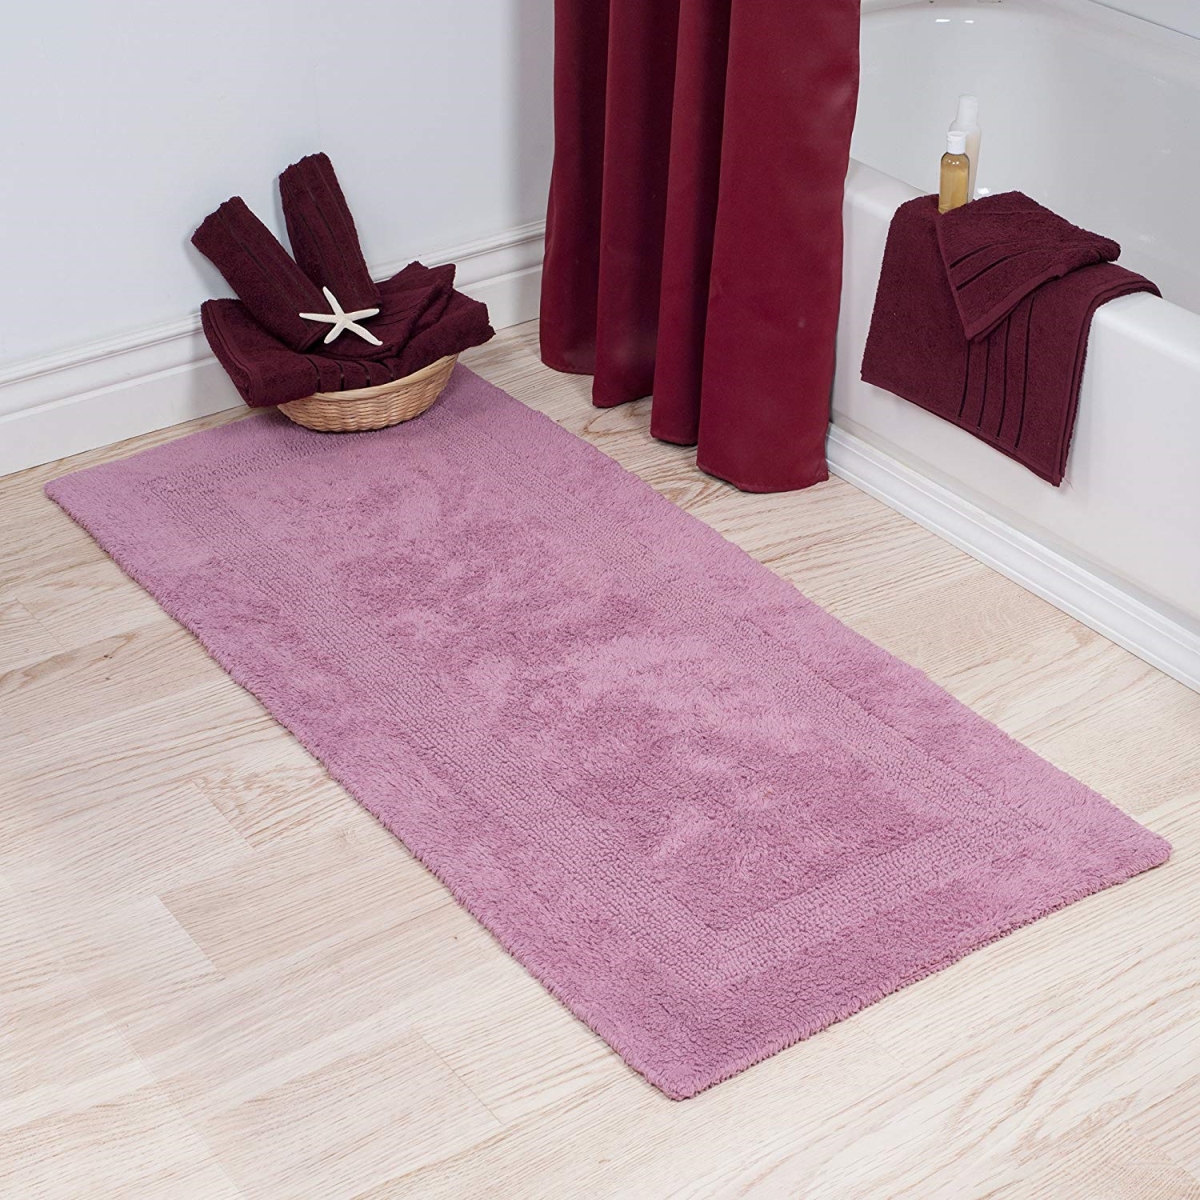 Picture of Bedford Home 67A-01639 100 Percent Cotton Reversible Long Bath Rug - Rose - 24 x 60 in.